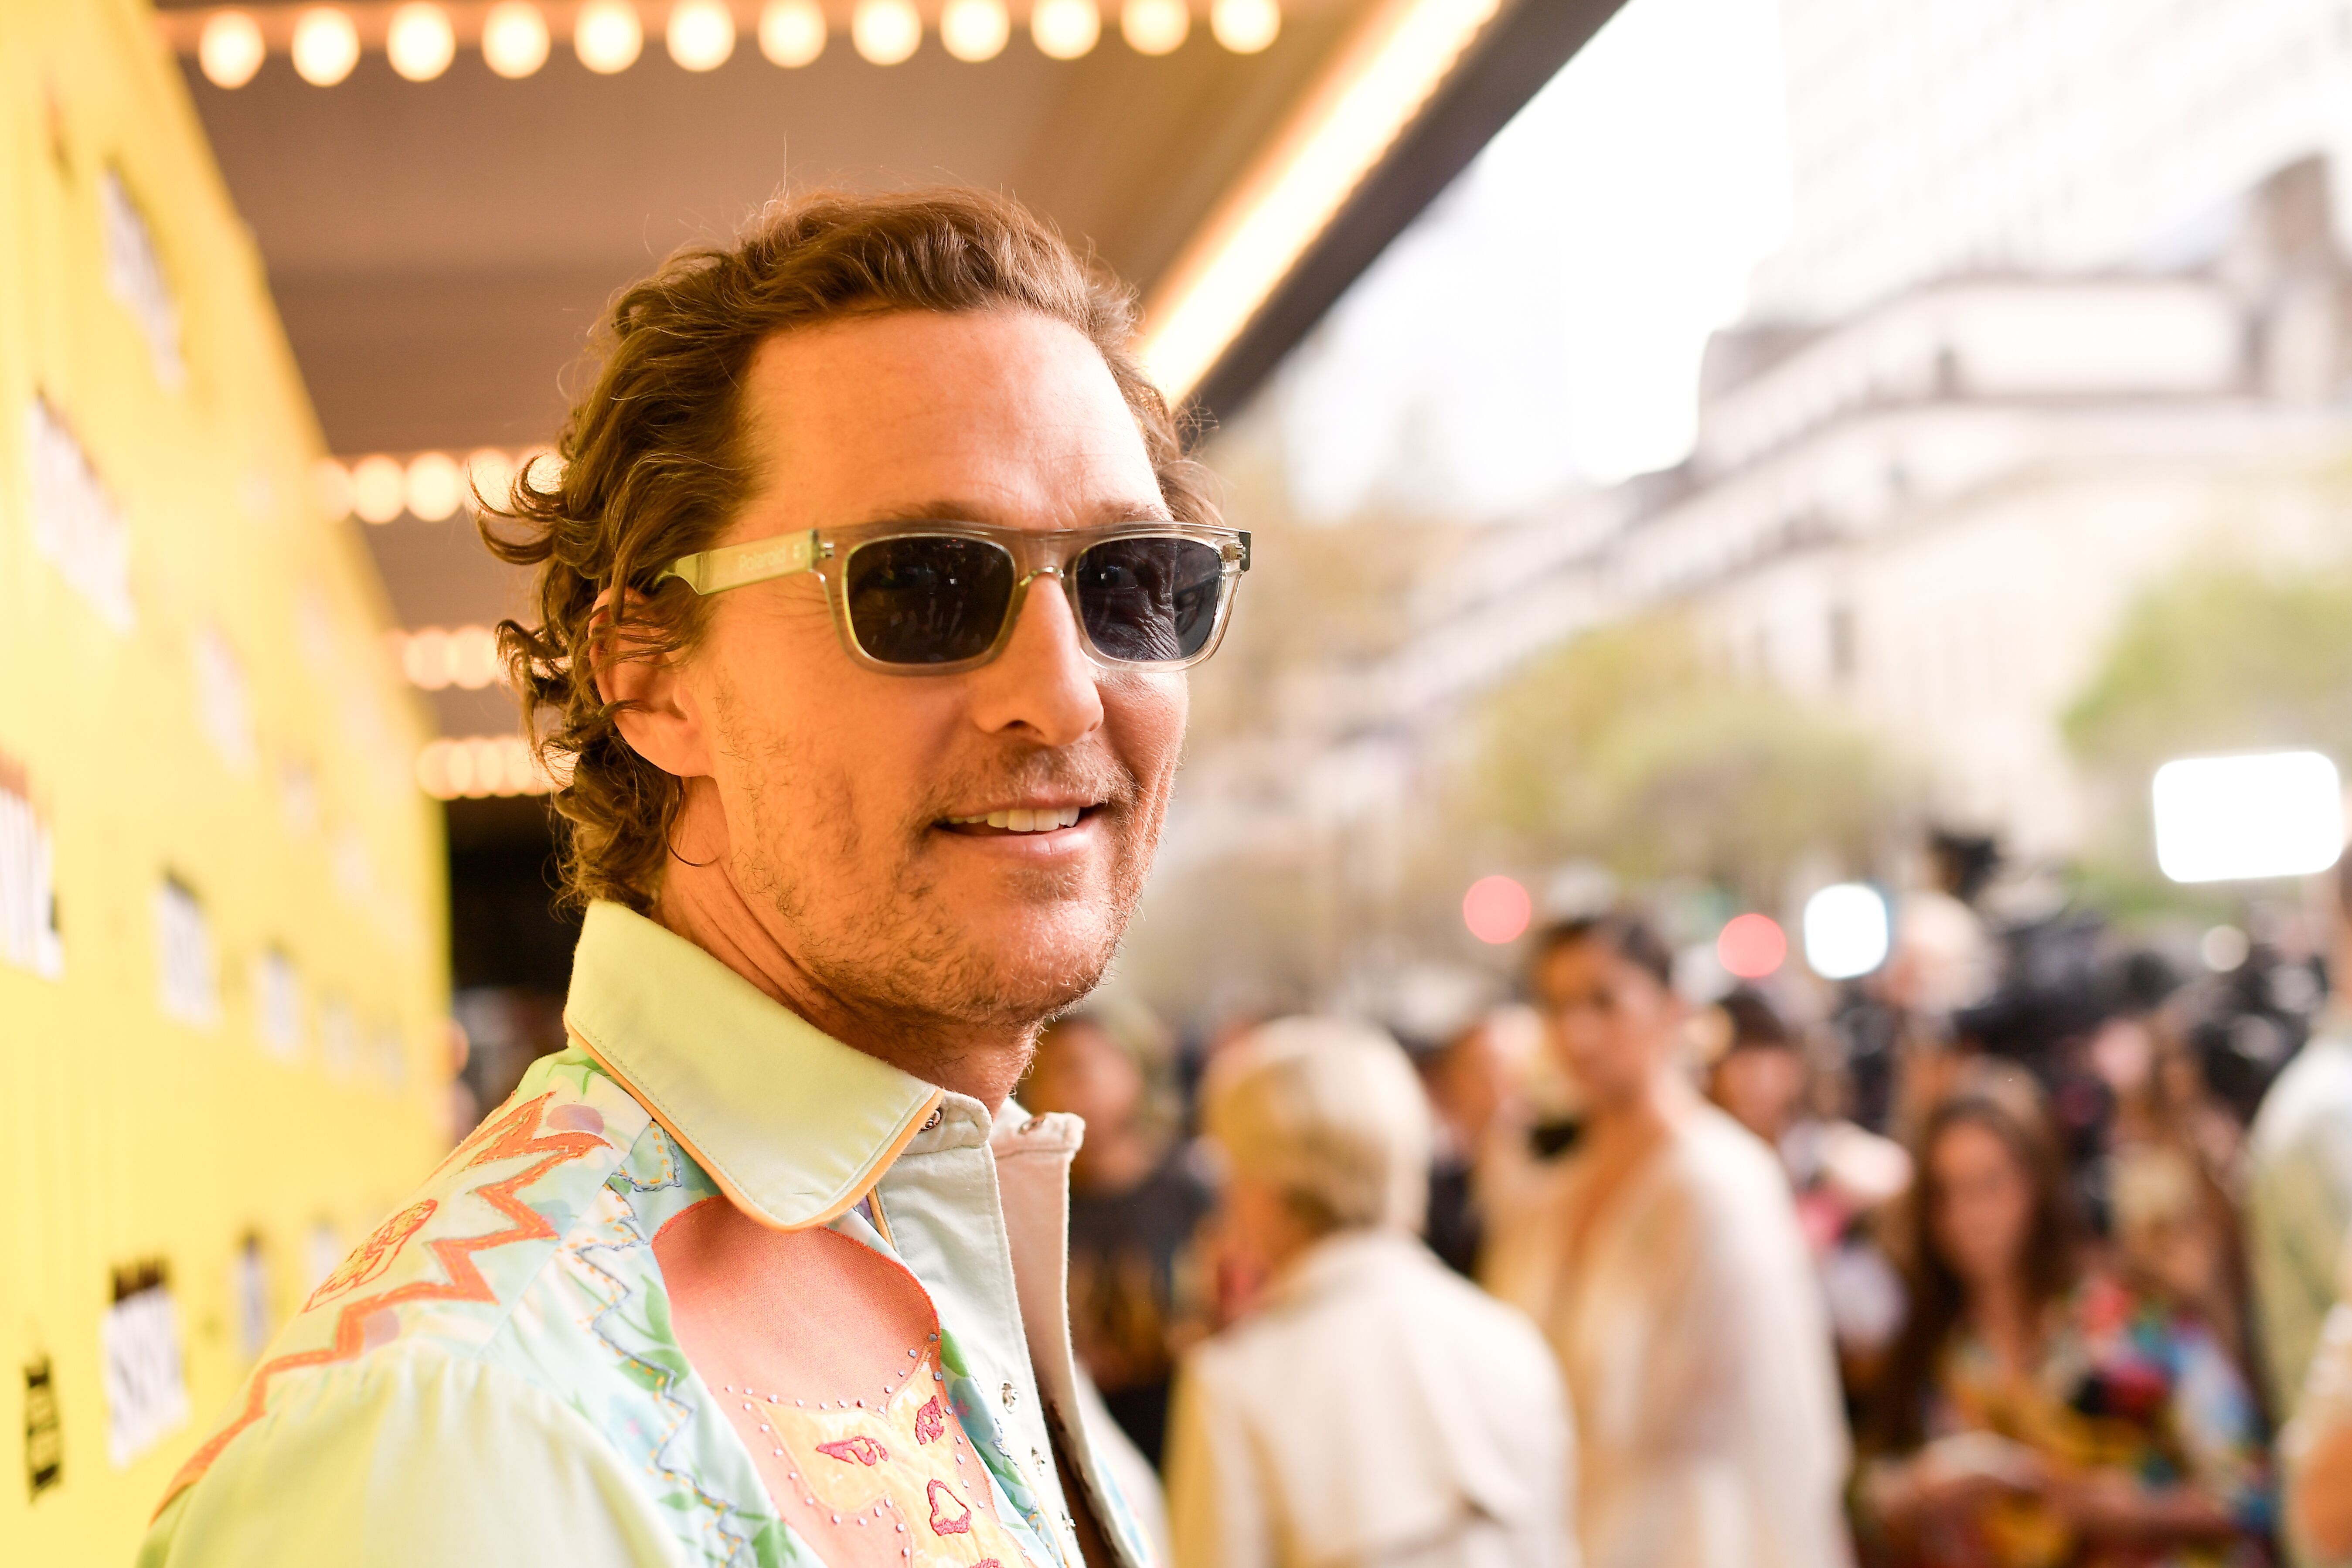  Matthew McConaughey attends the "The Beach Bum" Premiere 2019 SXSW Conference and Festivals at Paramount Theatre on March 09, 2019 in Austin, Texas. | Source: Getty Images